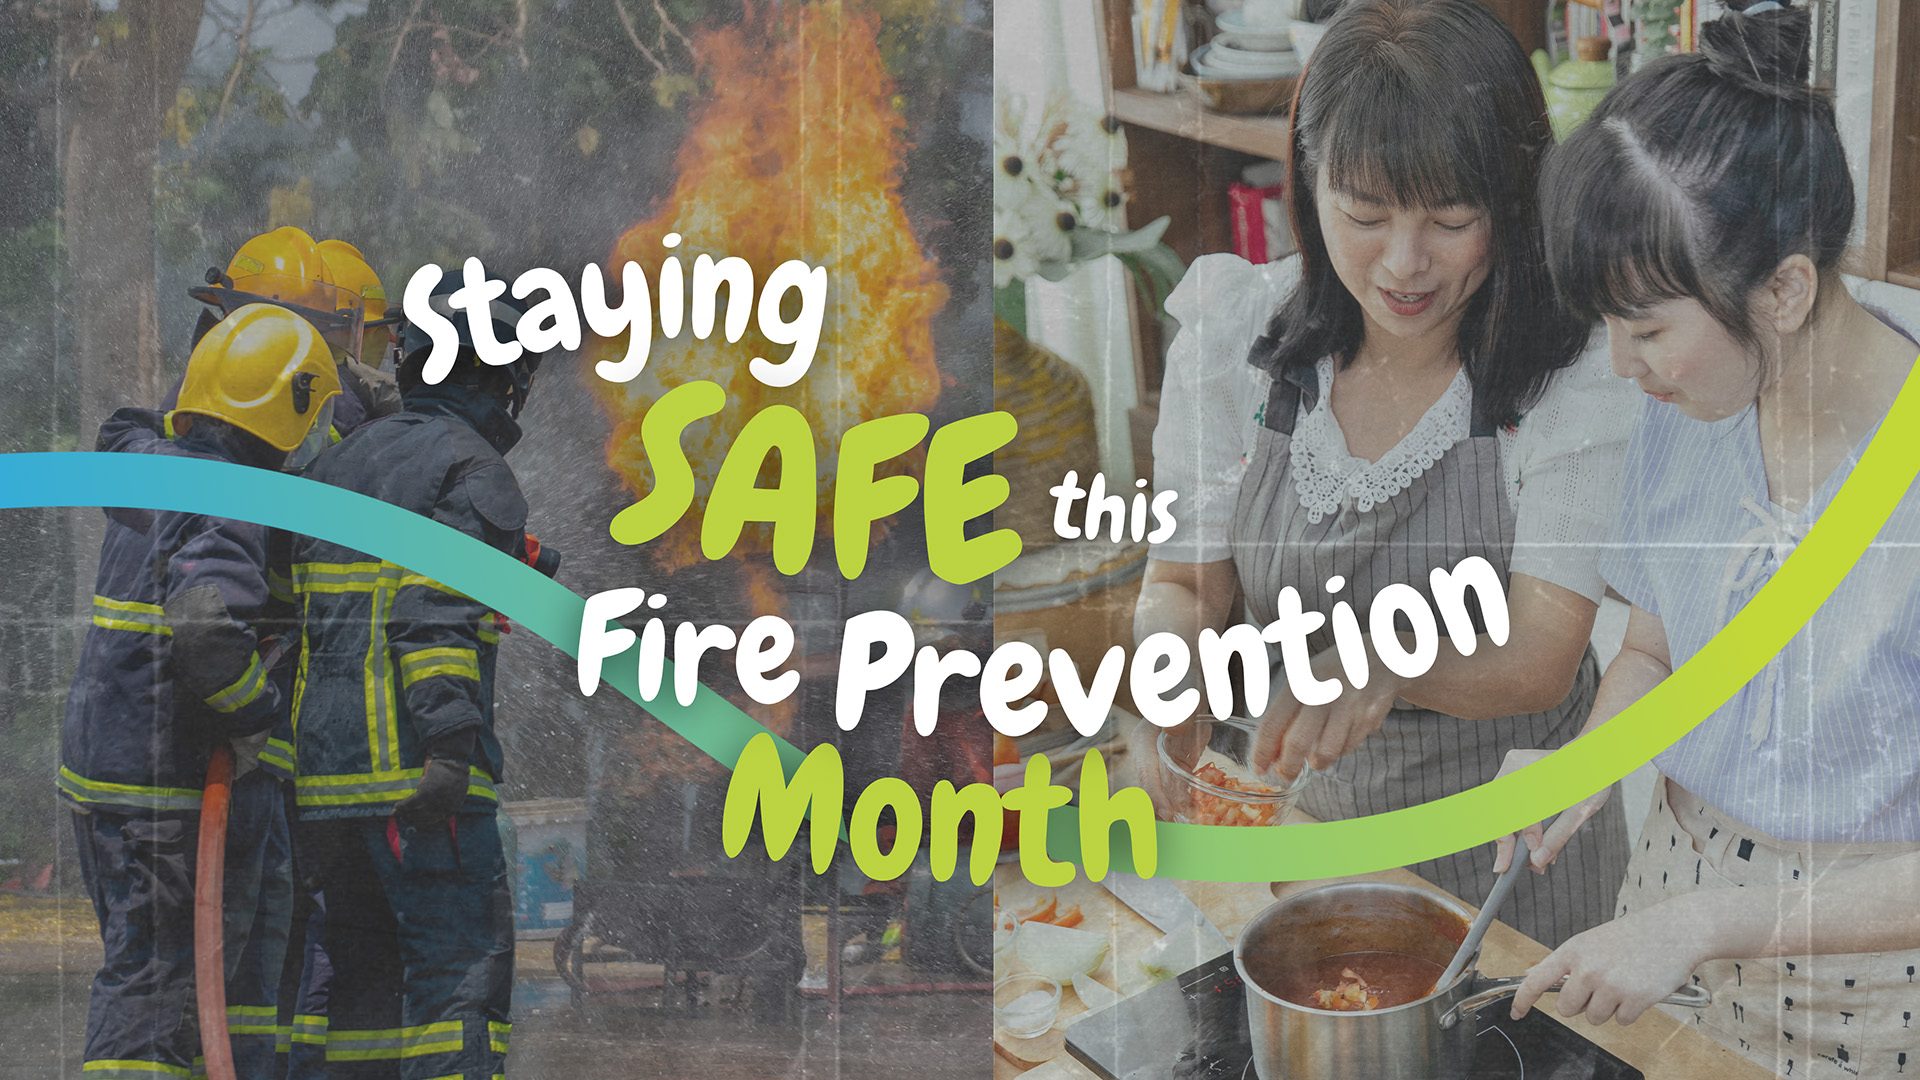 AboitizPower reminds everyone to stay safe from fires this Fire Prevention Month